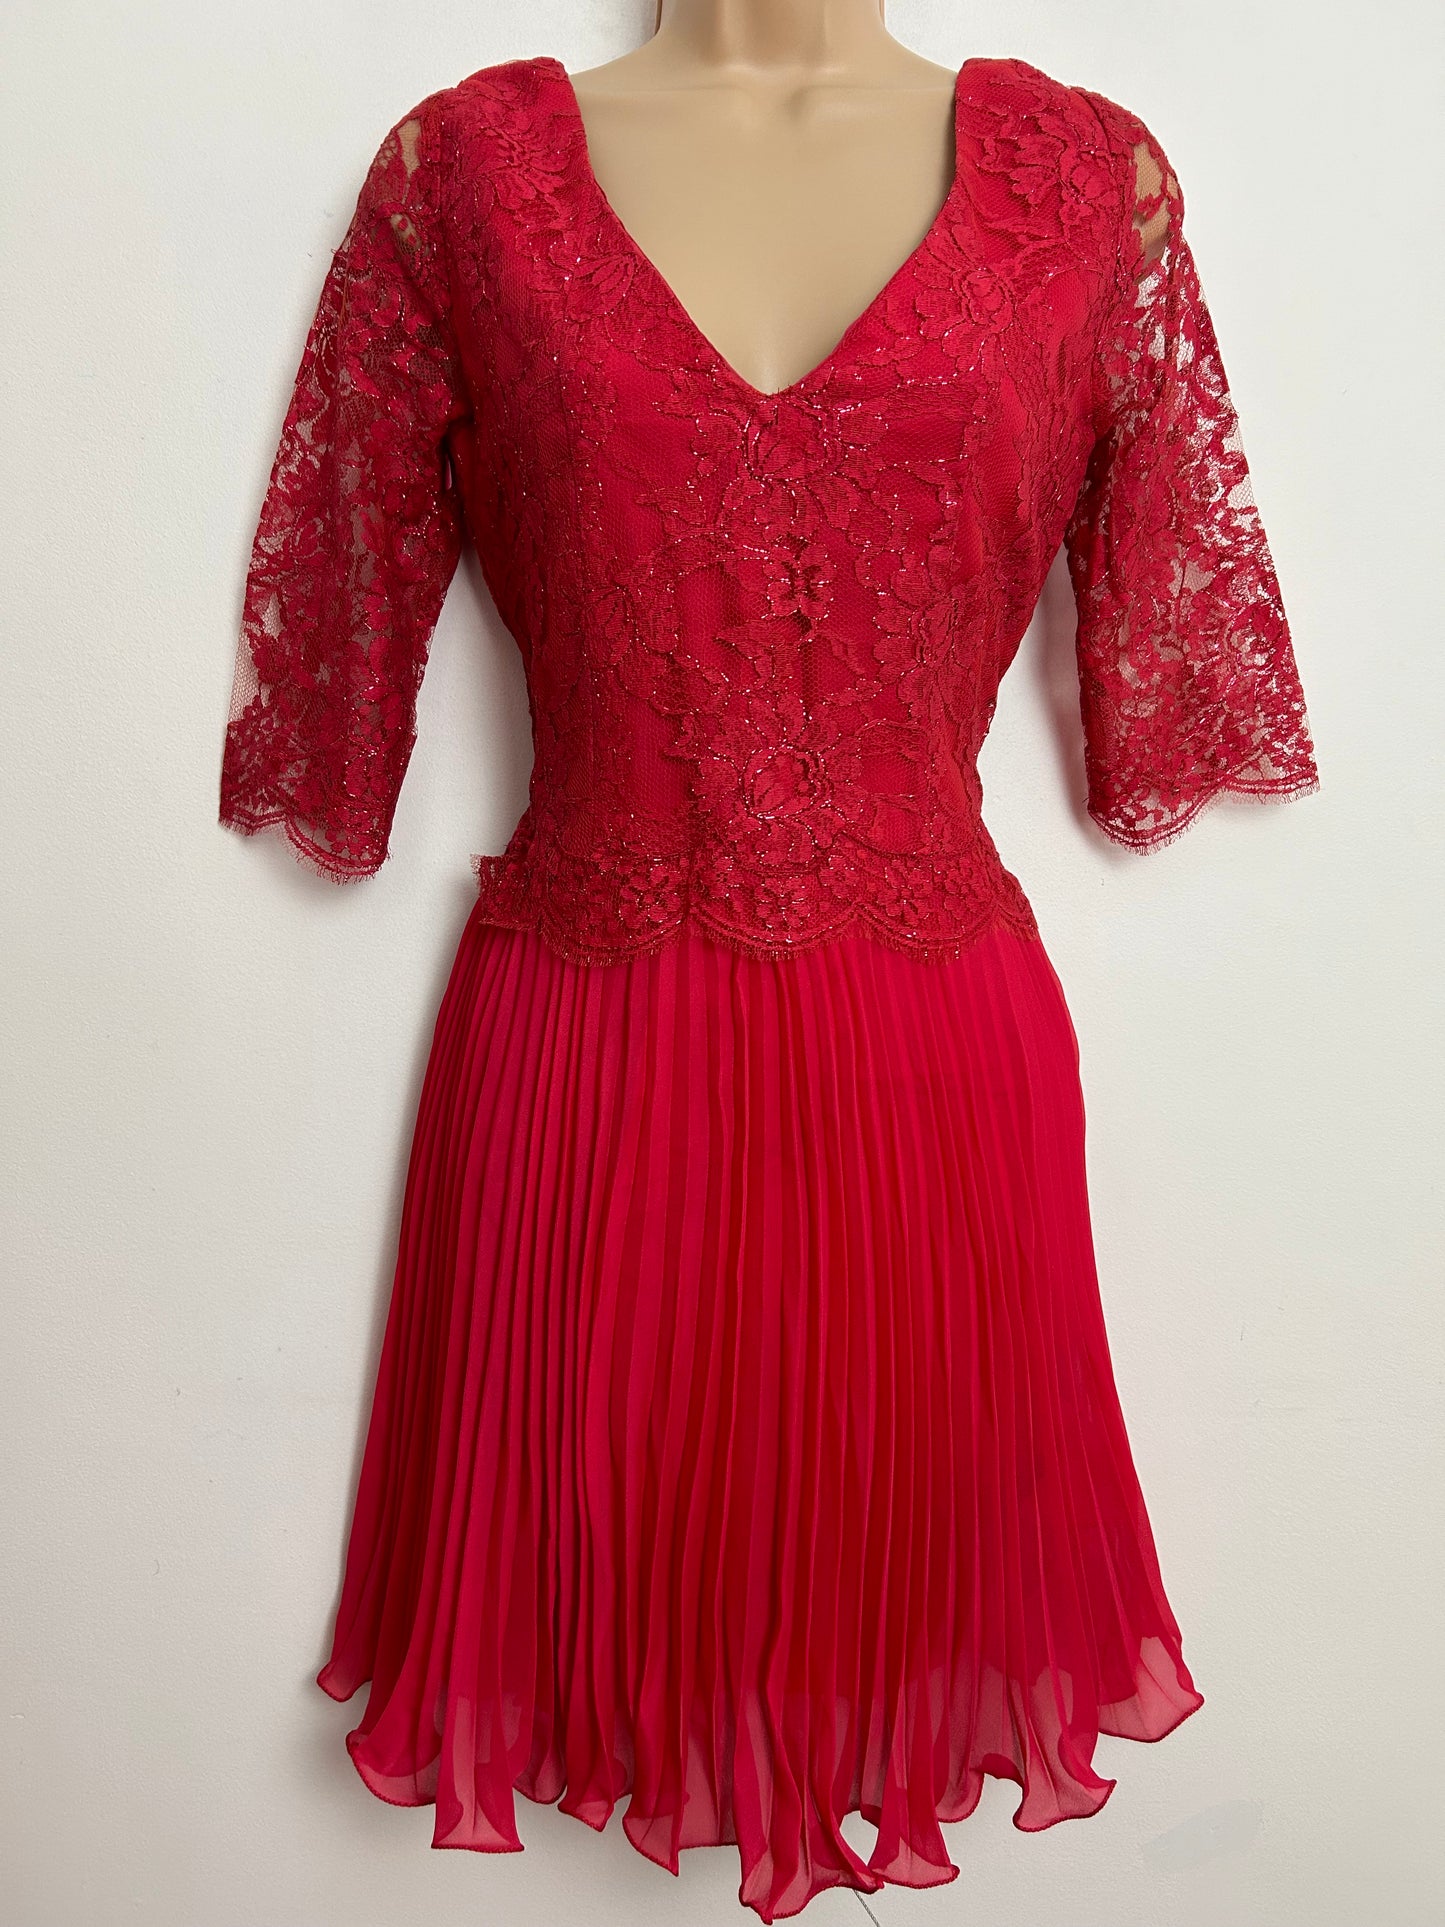 Vintage 1960s LINK MODELL UK Size 8 Raspberry Lace Metallic Detail Pleated Occasion Party Dress